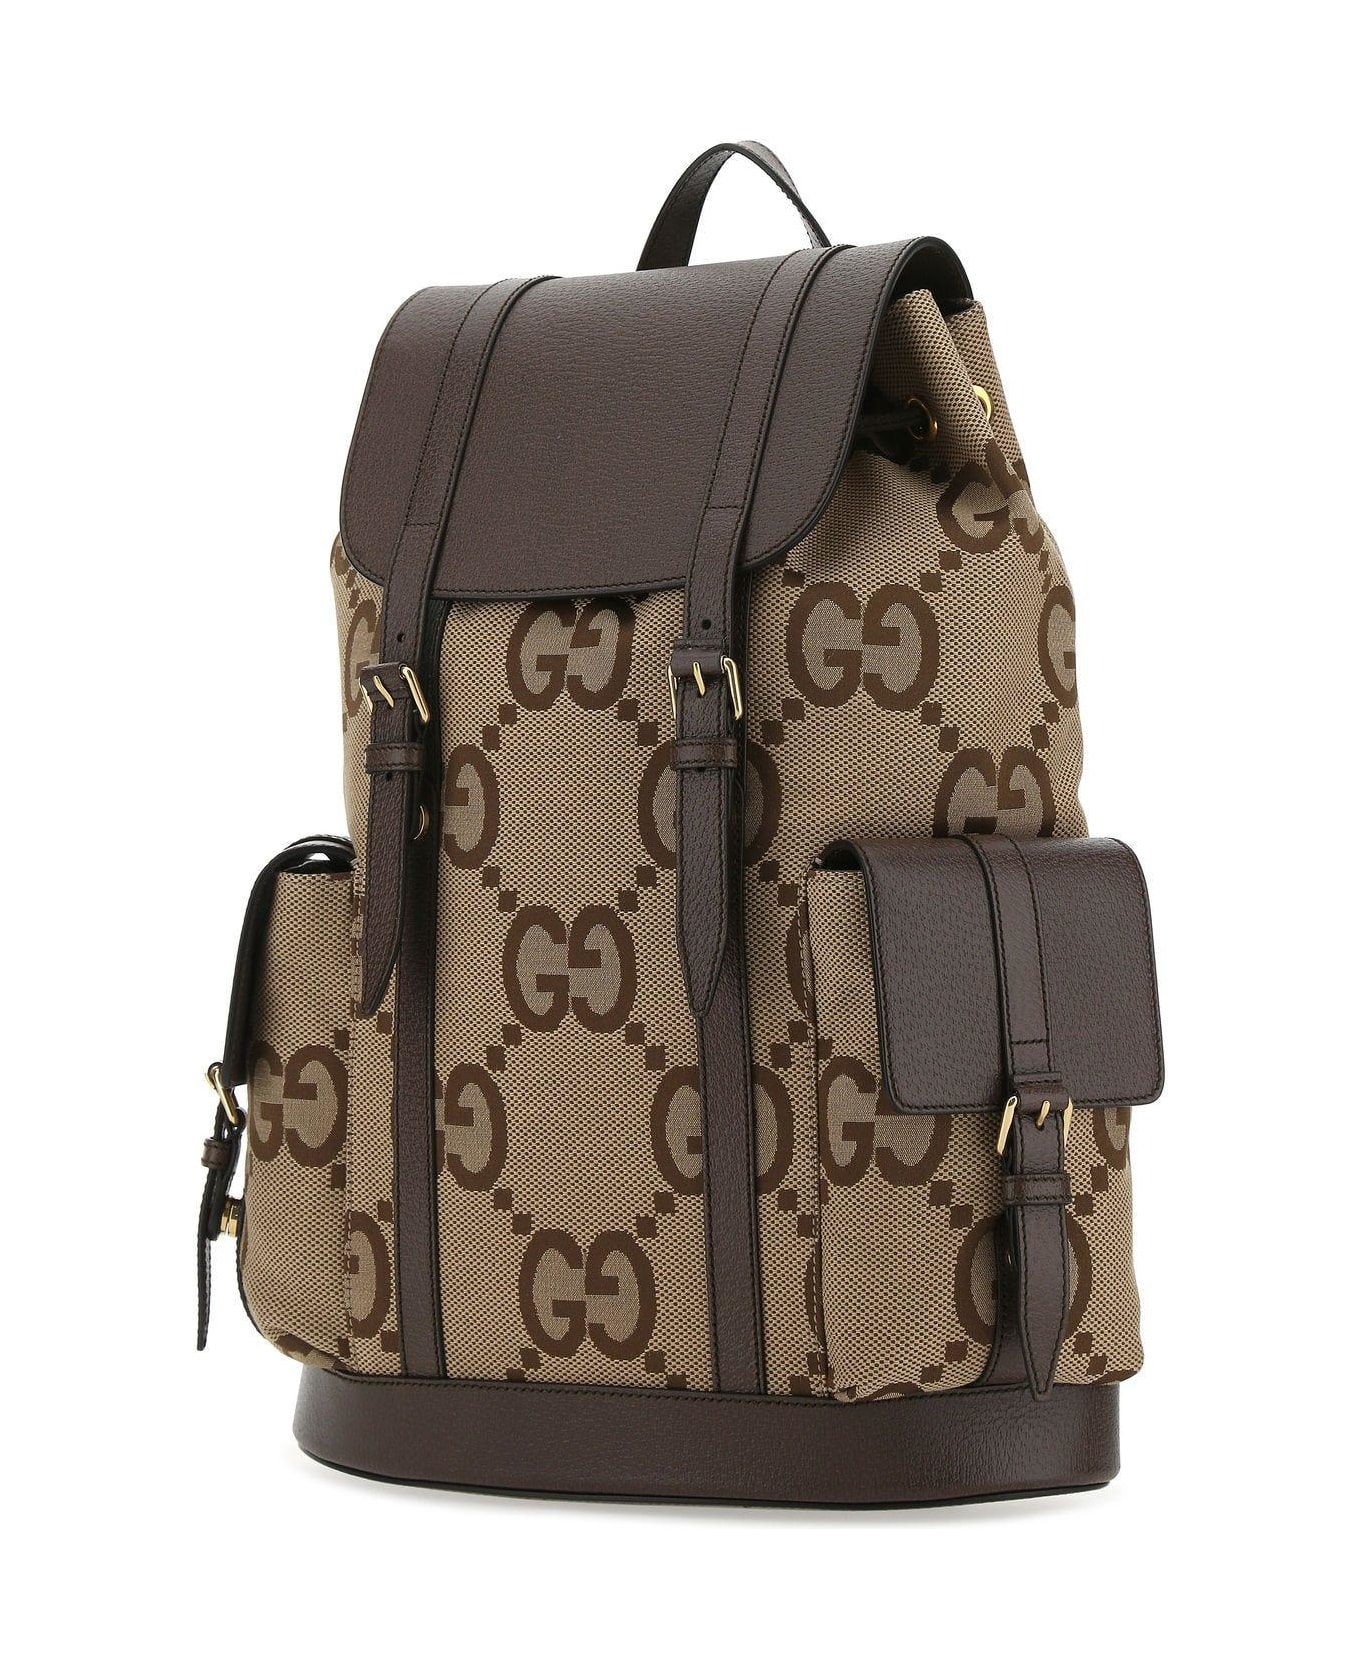 Gucci Multicolor Jumbo Gg Fabric And Leather Backpack - Beige バックパック